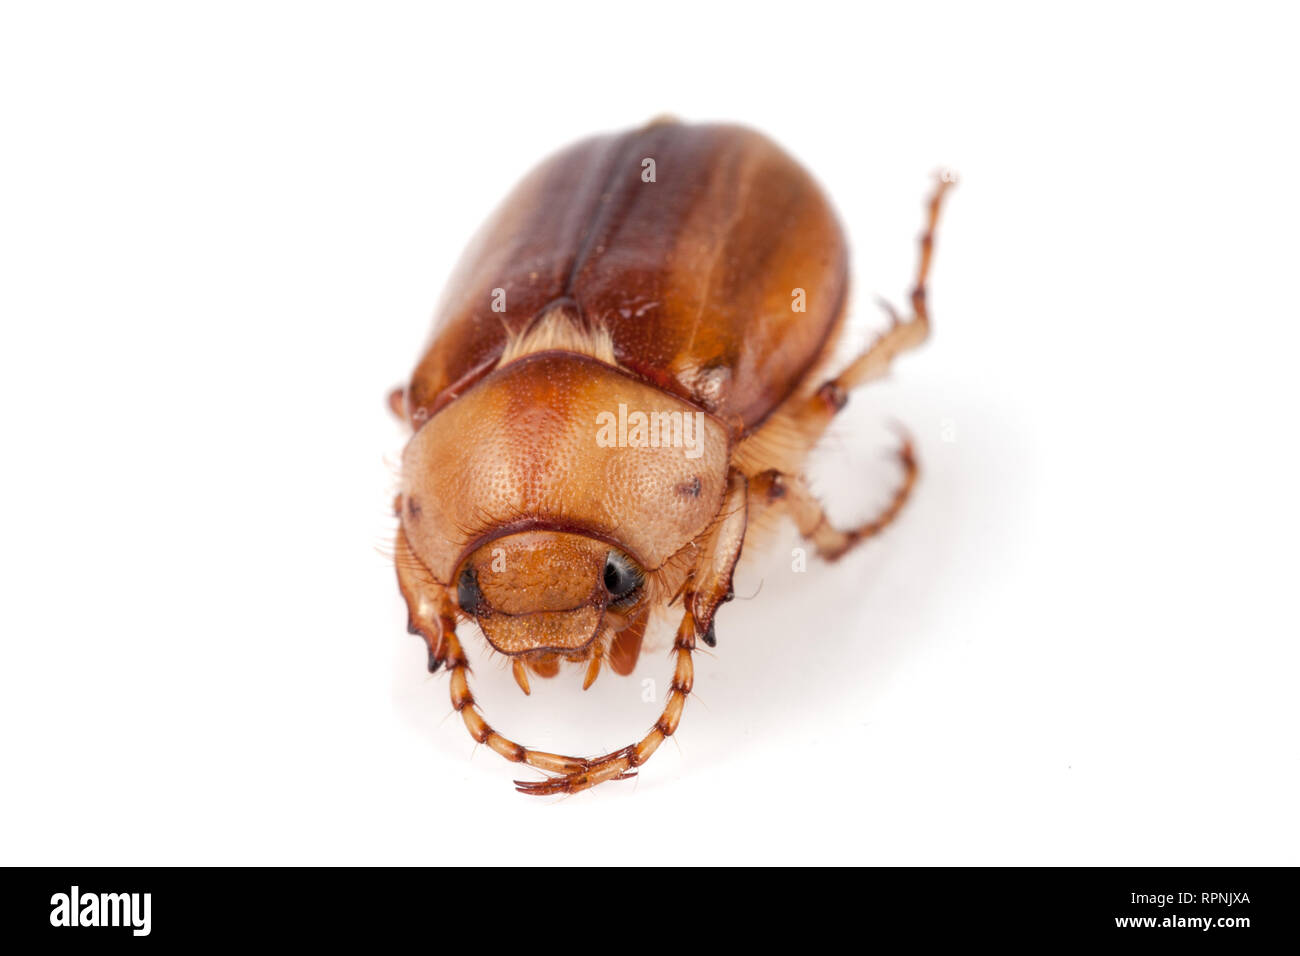 May beetle or Cockchafer or Melolontha isolated on white background Stock Photo